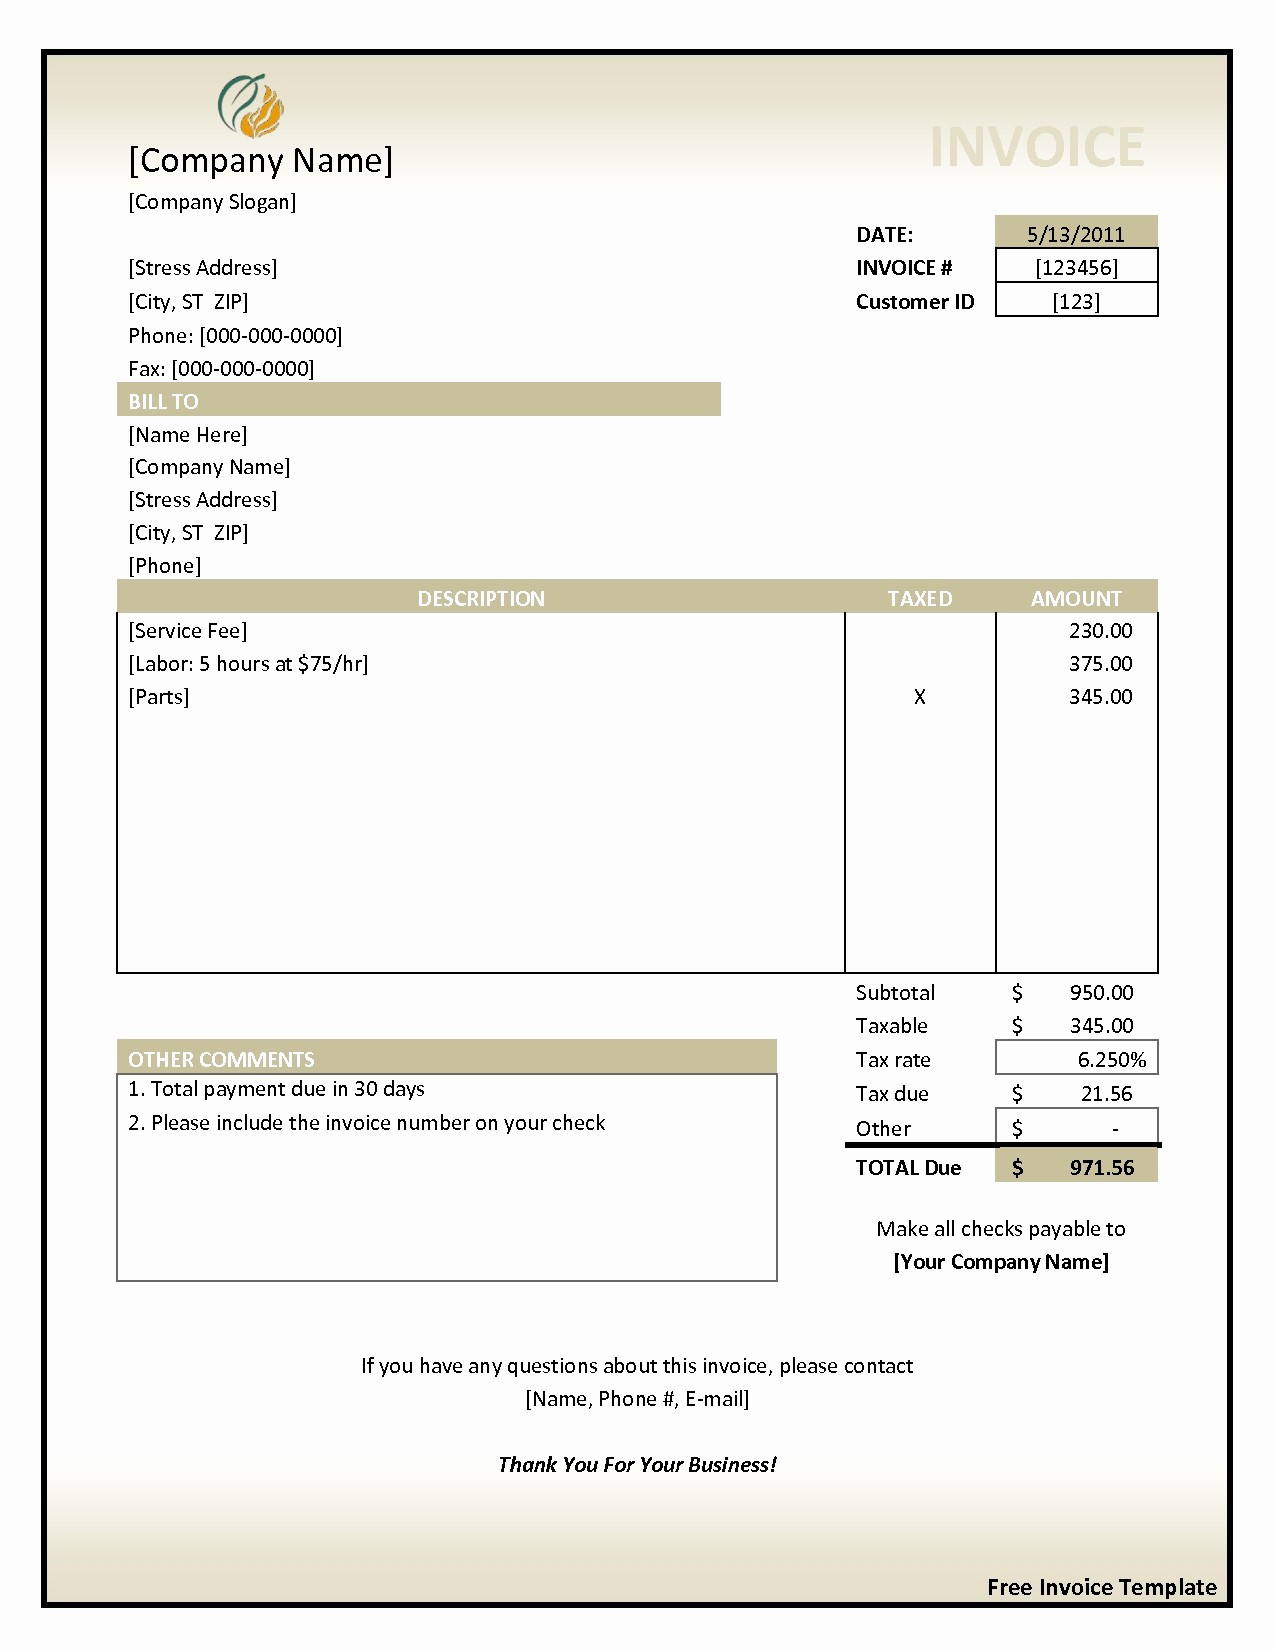 Free Templates for Billing Invoices Fresh Invoices Samples Free Invoice Template Ideas